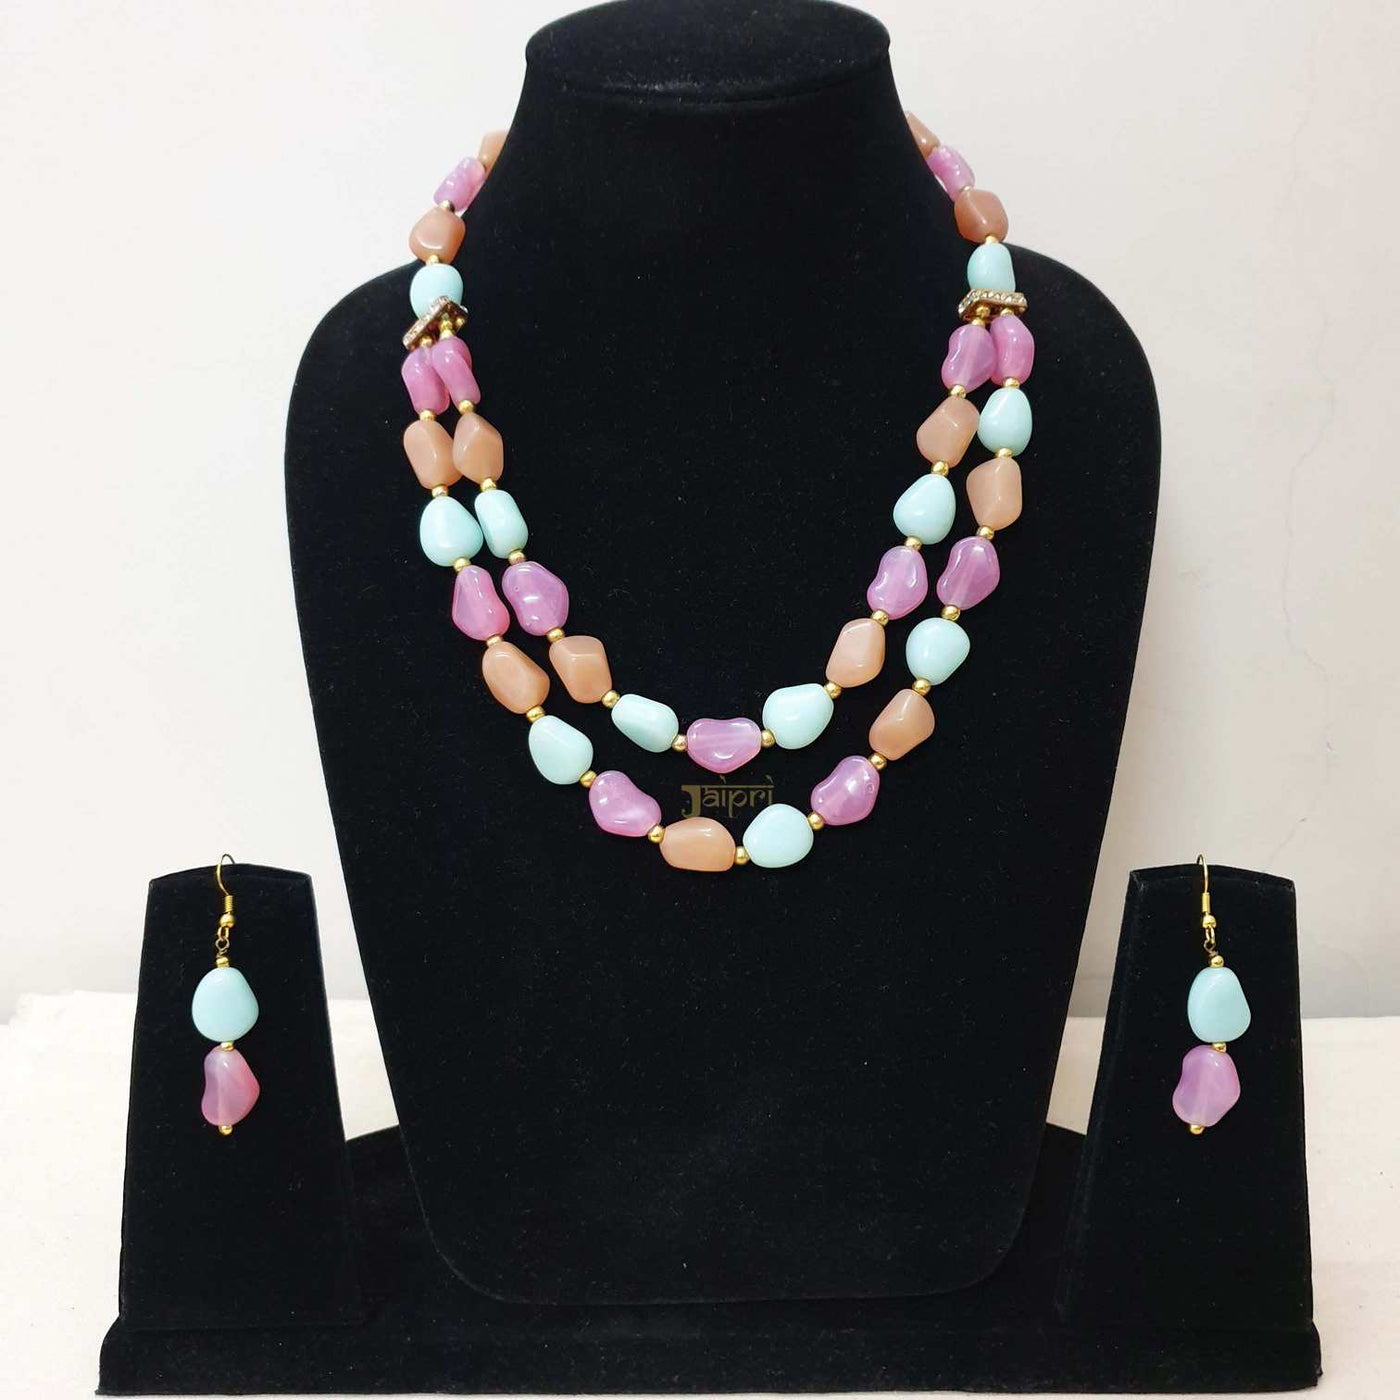 Multicolor Beads Stone Necklace With Earrings